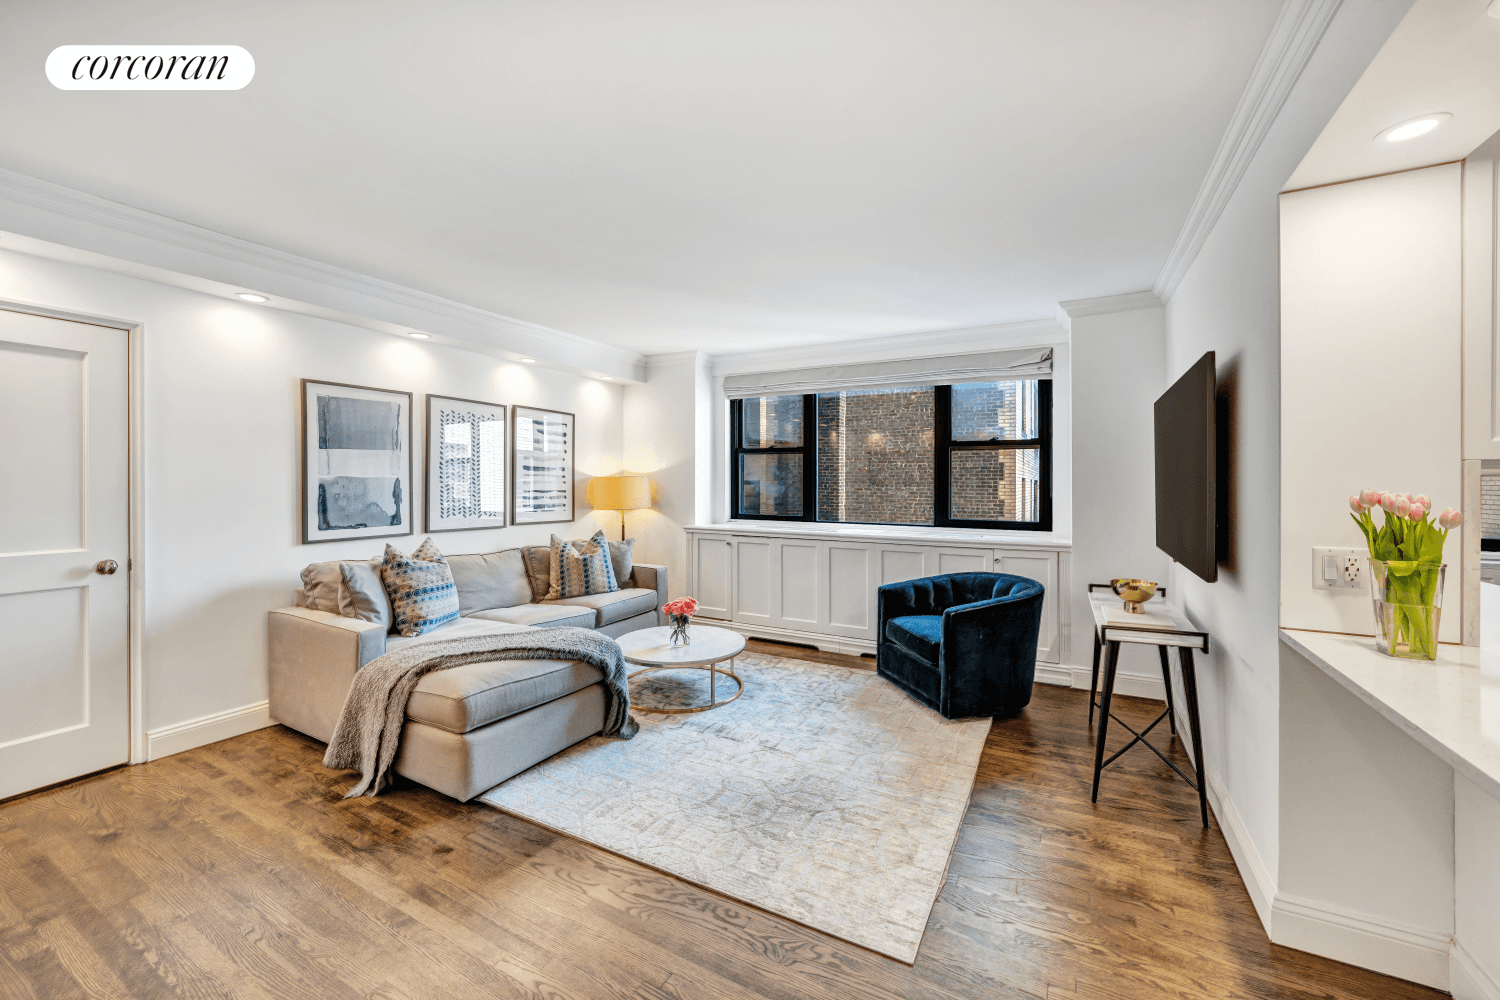 Welcome home to apartment 9FG, a sprawling 2 bedroom, 2 bathroom apartment located in 315 East 72nd Street.